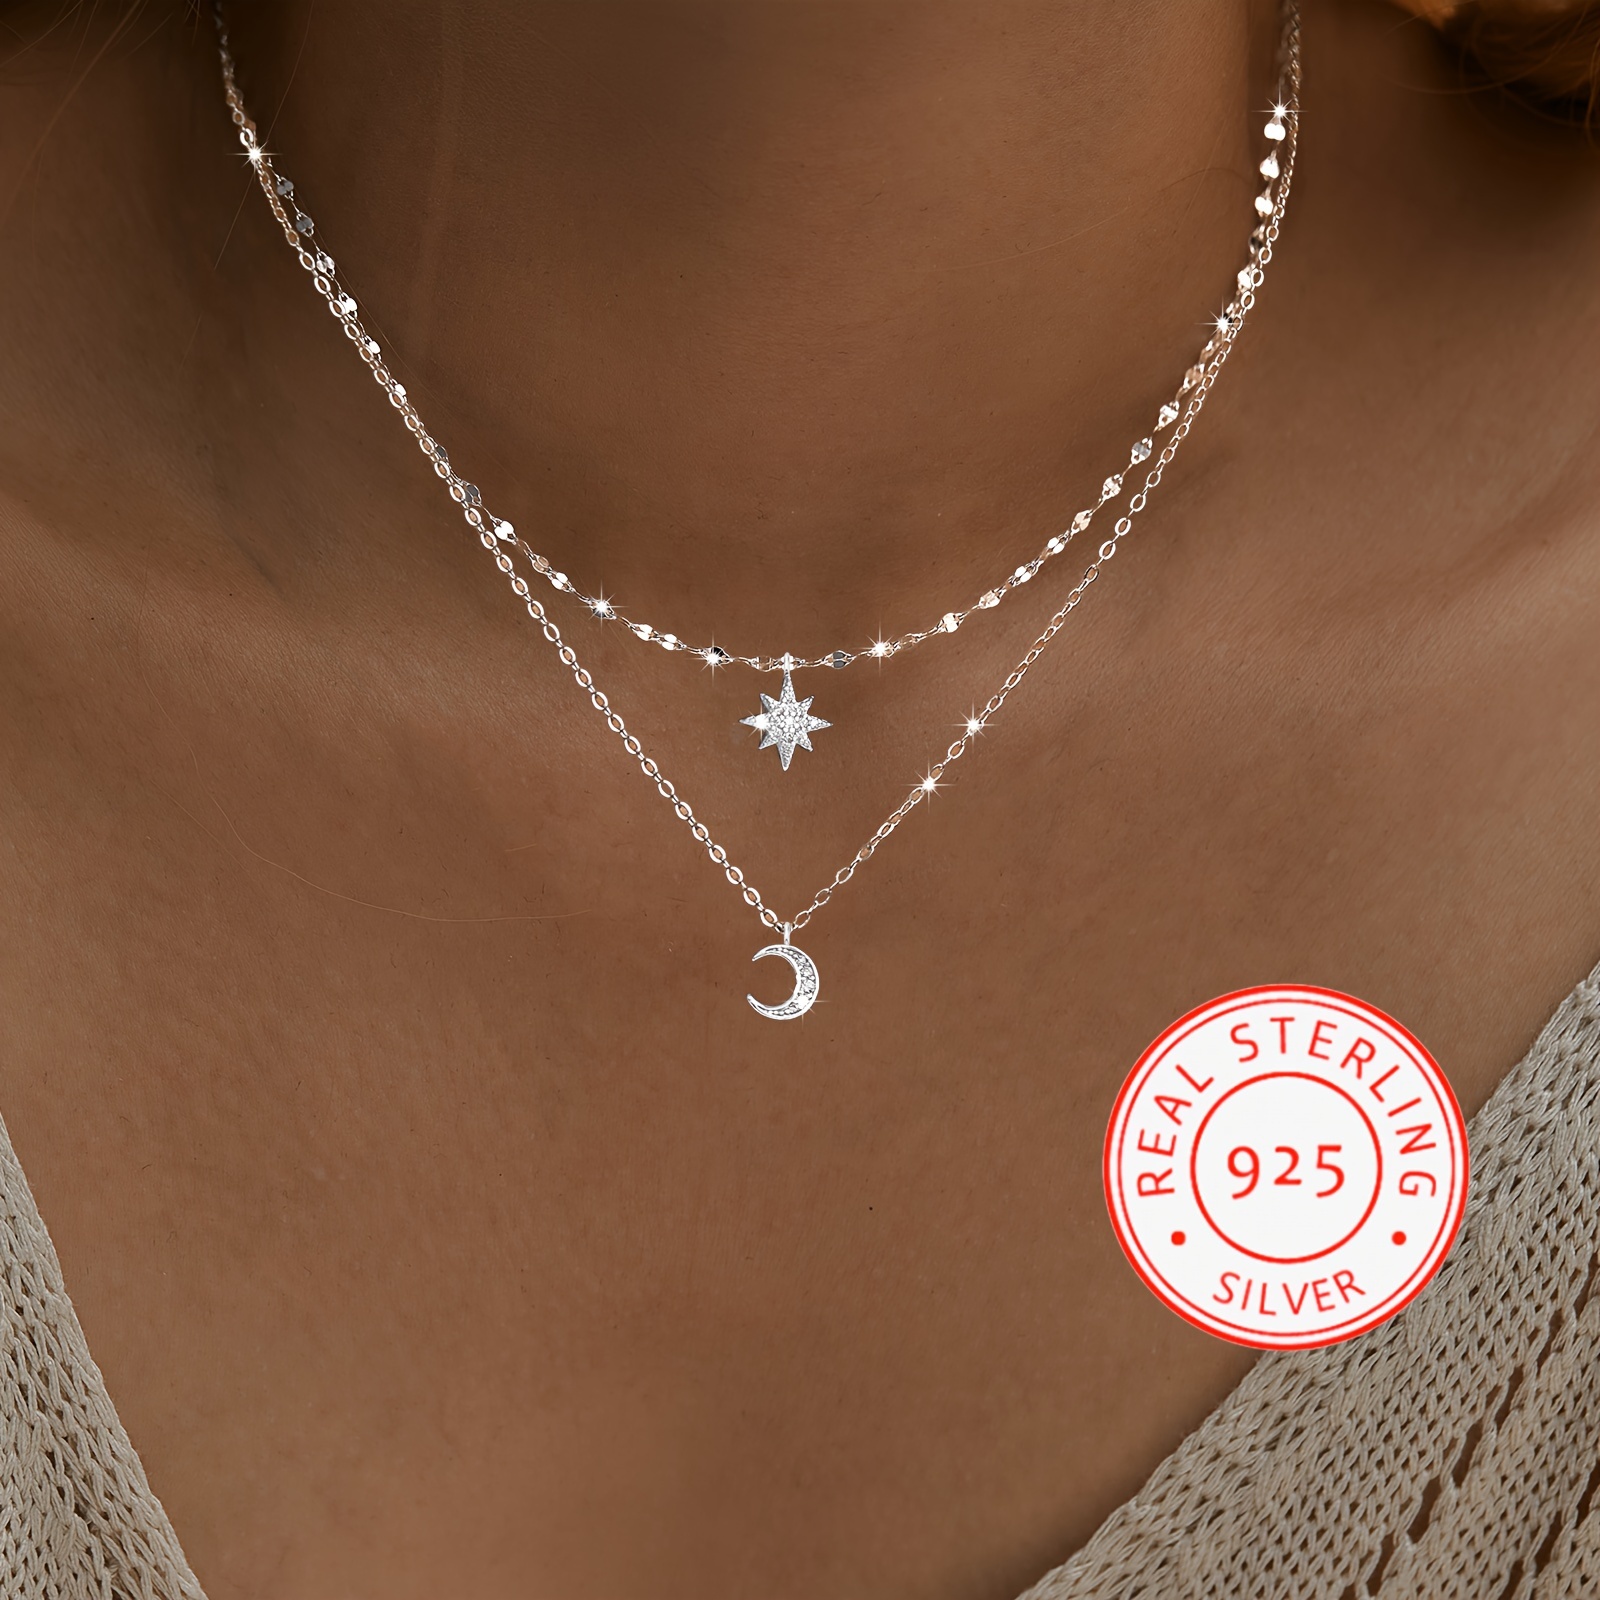 

1 Pc Of 925 Sterling Silver Layered Necklace Chain Star Moon Choker Necklace For Women Teen Girls Layering Chain Choker